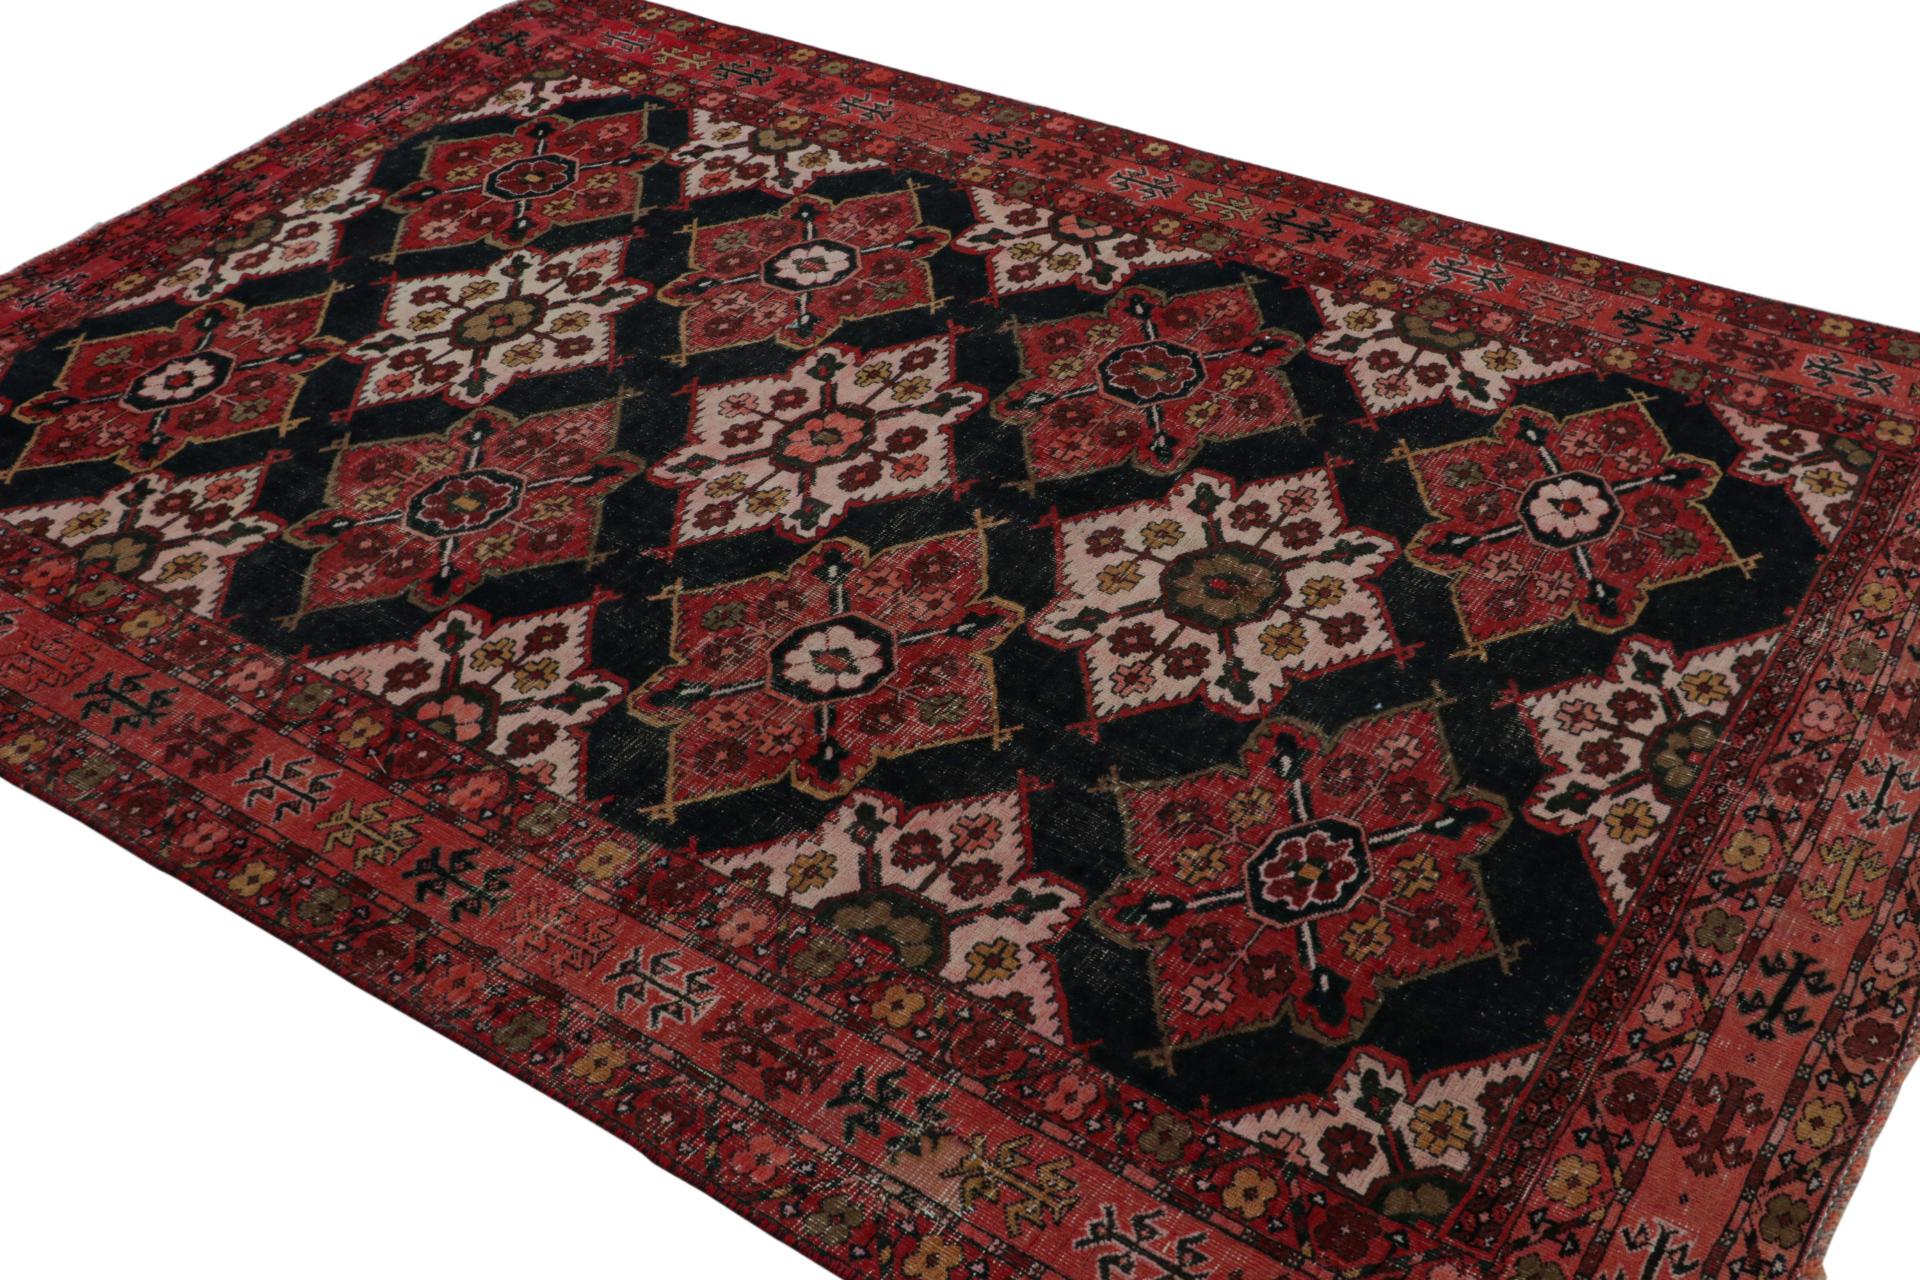 From our new collection of overdyed rugs, a vintage 6x8 Persian rug originating circa 1970-1980. Hand knotted in wool on cotton.

On the Design:

The black field underscores rich red floral patterns in medallions and borders alike. The delicious